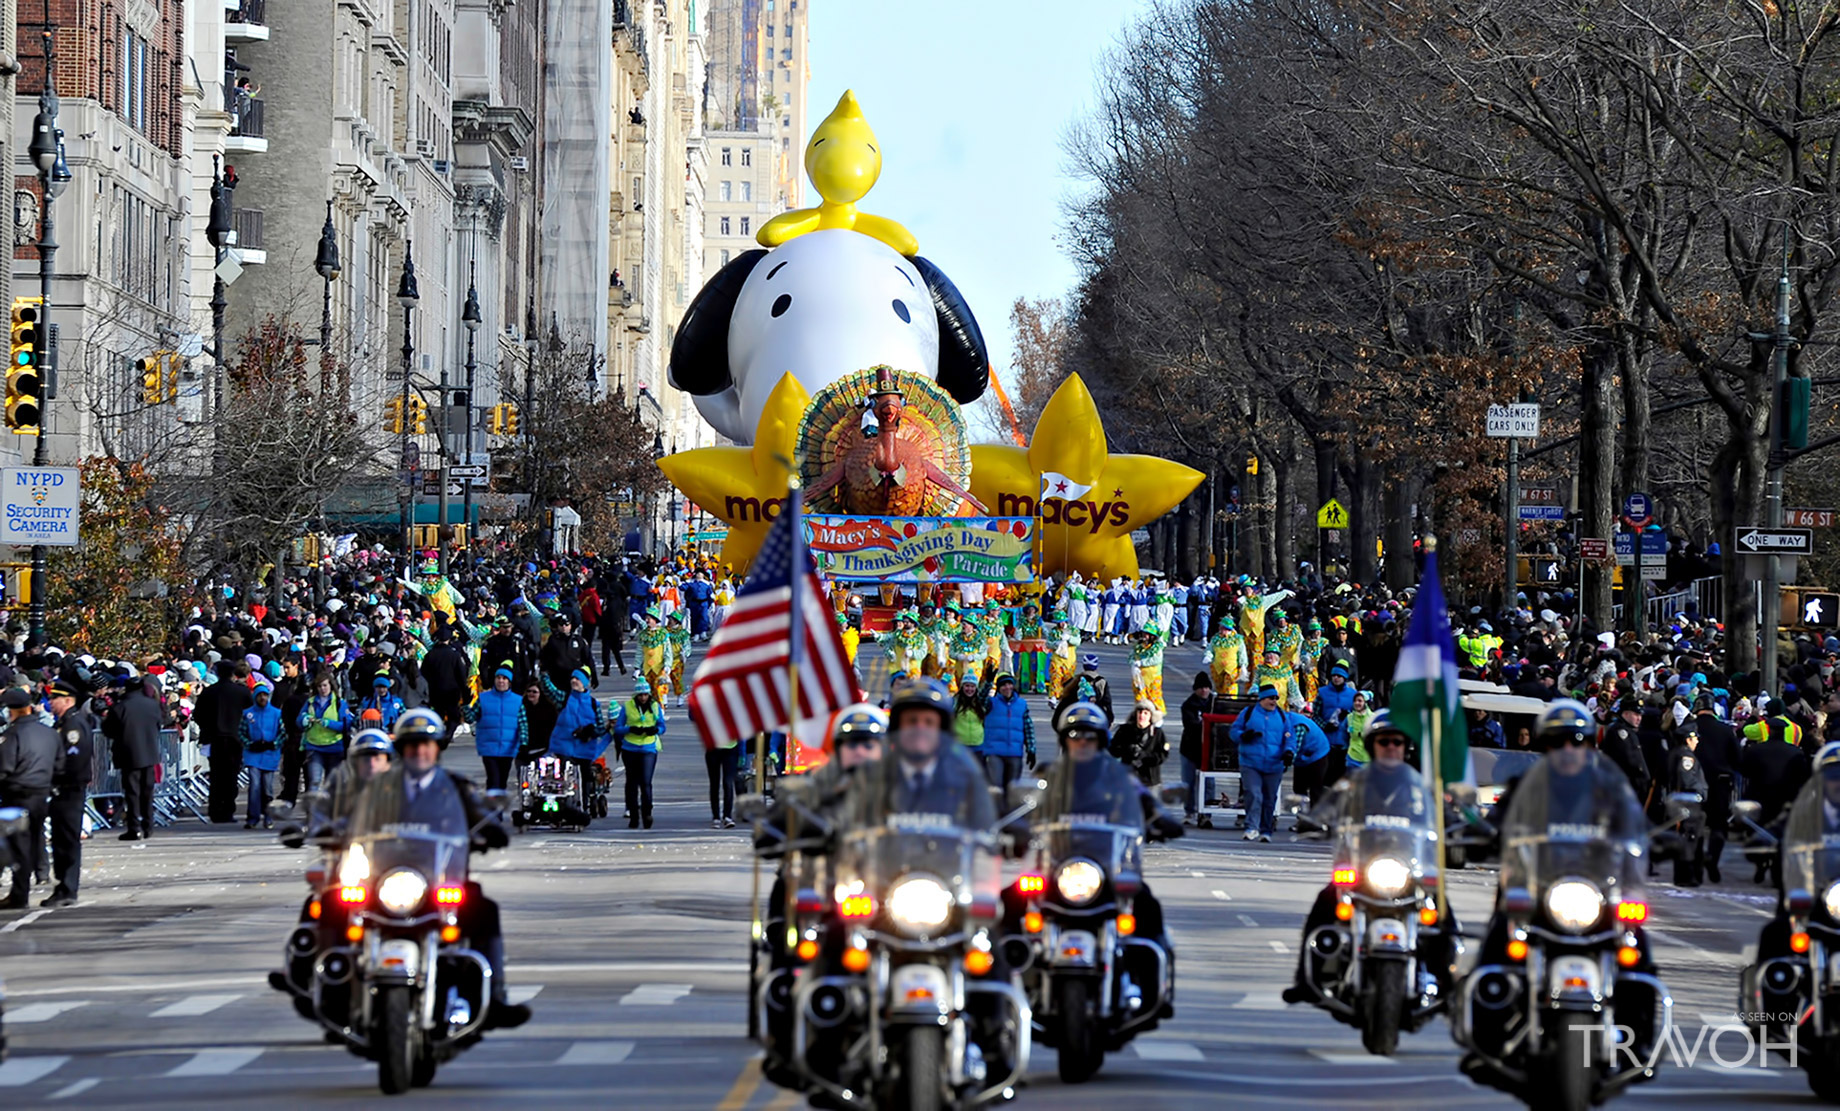 The Macy’s Thanksgiving Day Parade